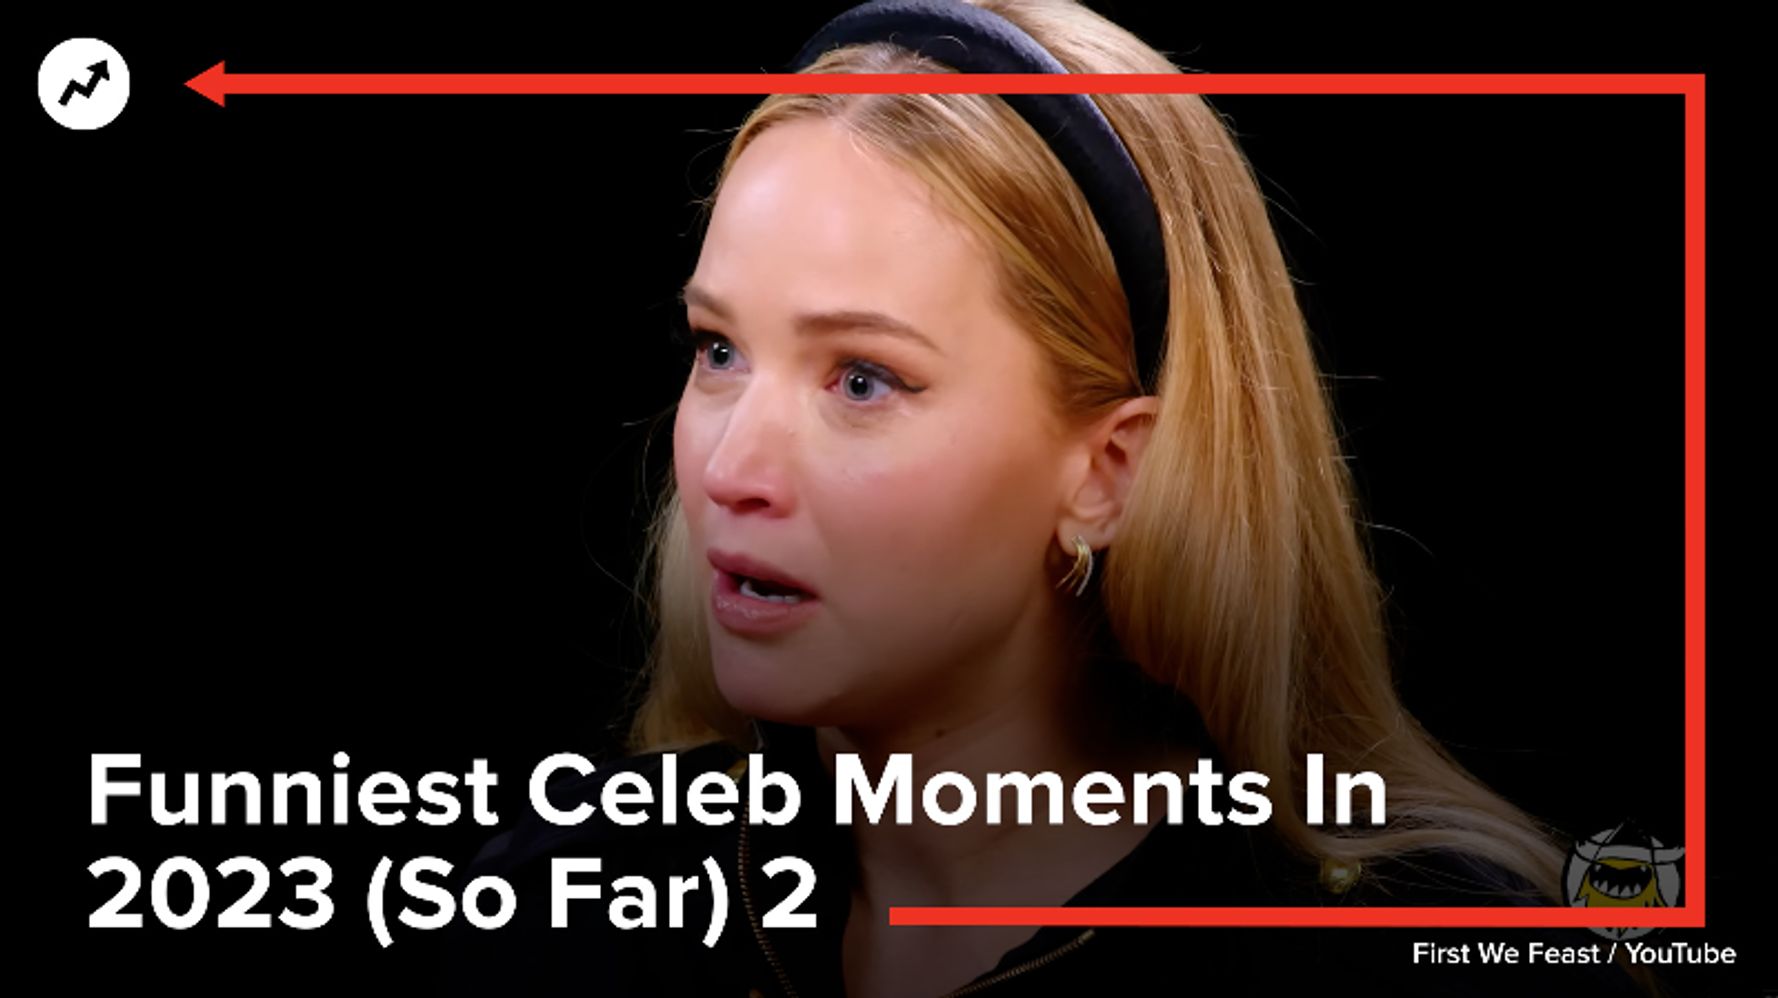 Funniest Celeb Moments In 2023 (So Far) 2 | HuffPost Videos